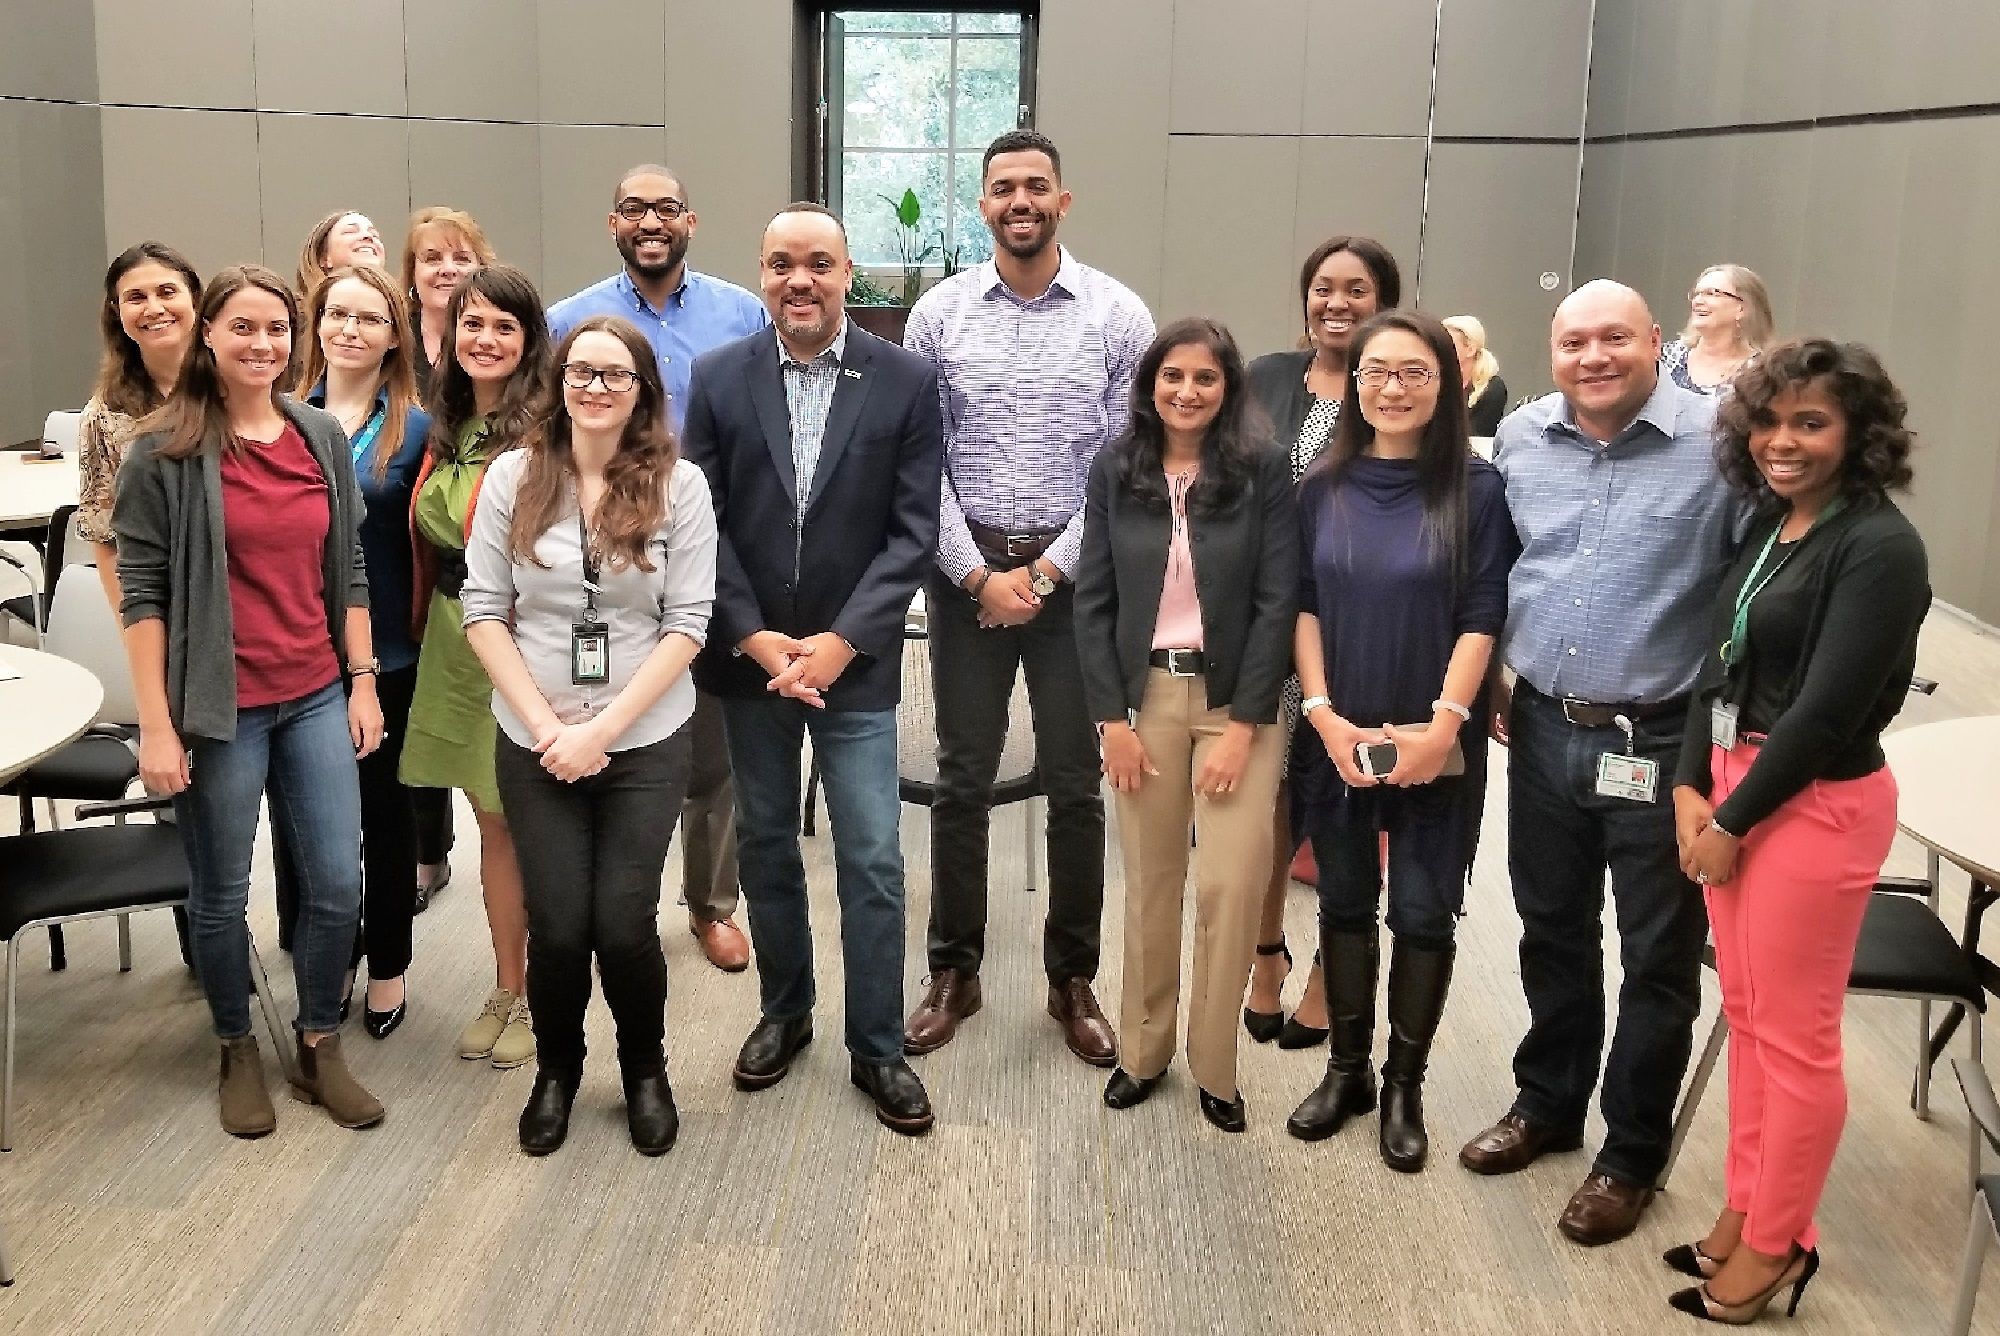 Clesmie with HPE Inclusion & Diversity leaders as well as members of Employee Resource Groups at a recent Brown Bag lunch